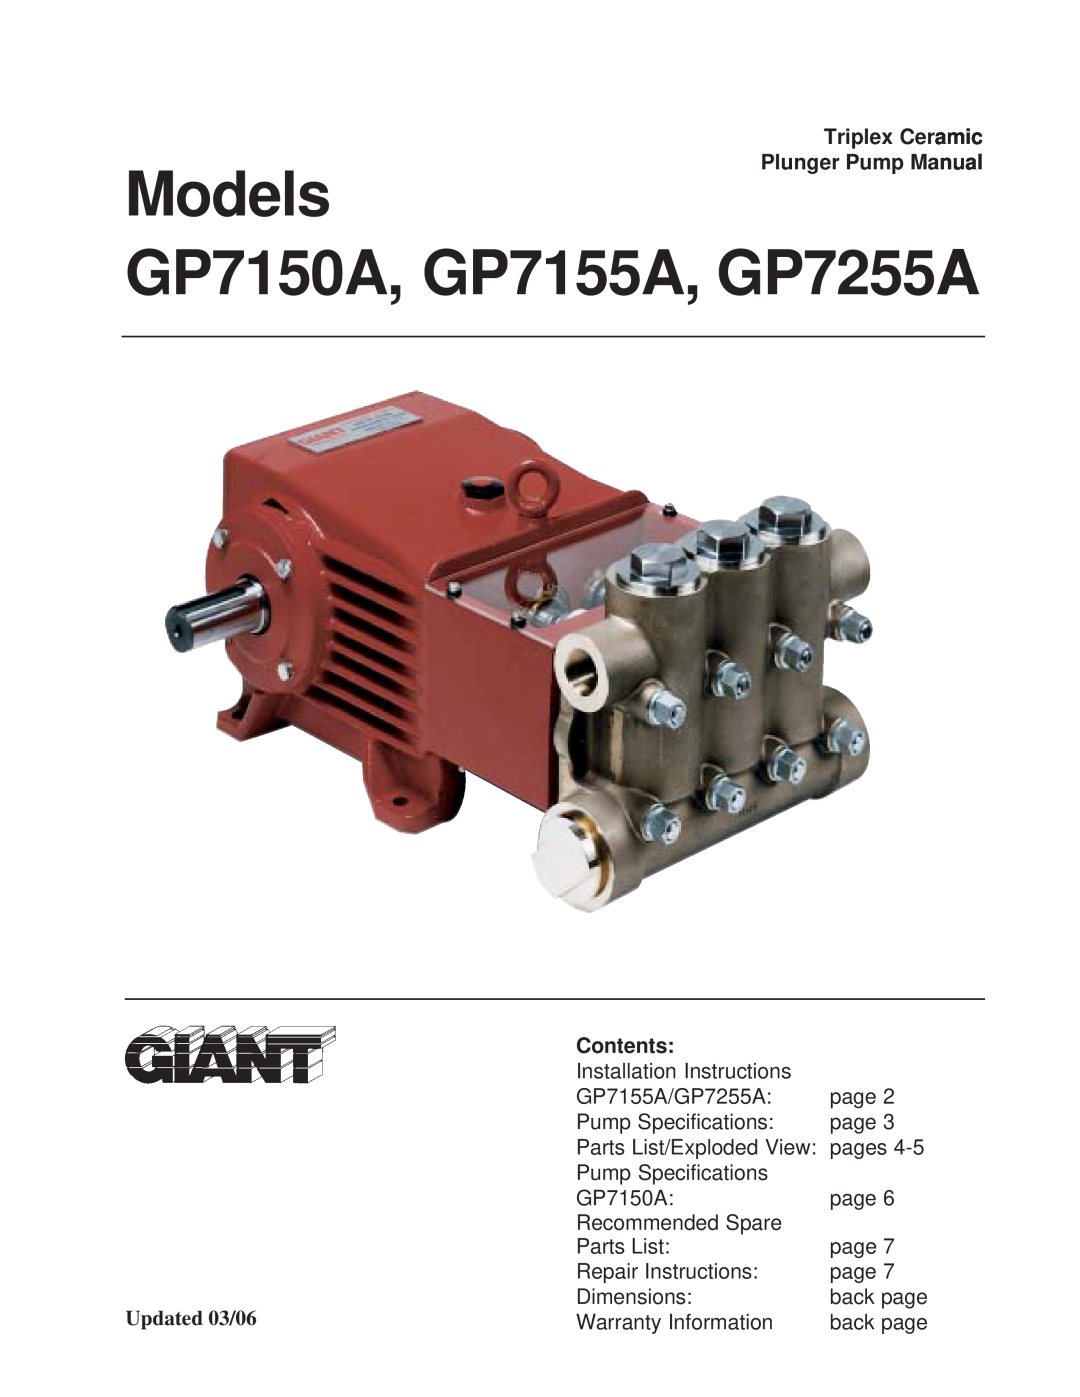 Giant GP7155A, GP7150A installation instructions Triplex Ceramic Plunger Pump Manual, Contents, Updated 03/06, Models 